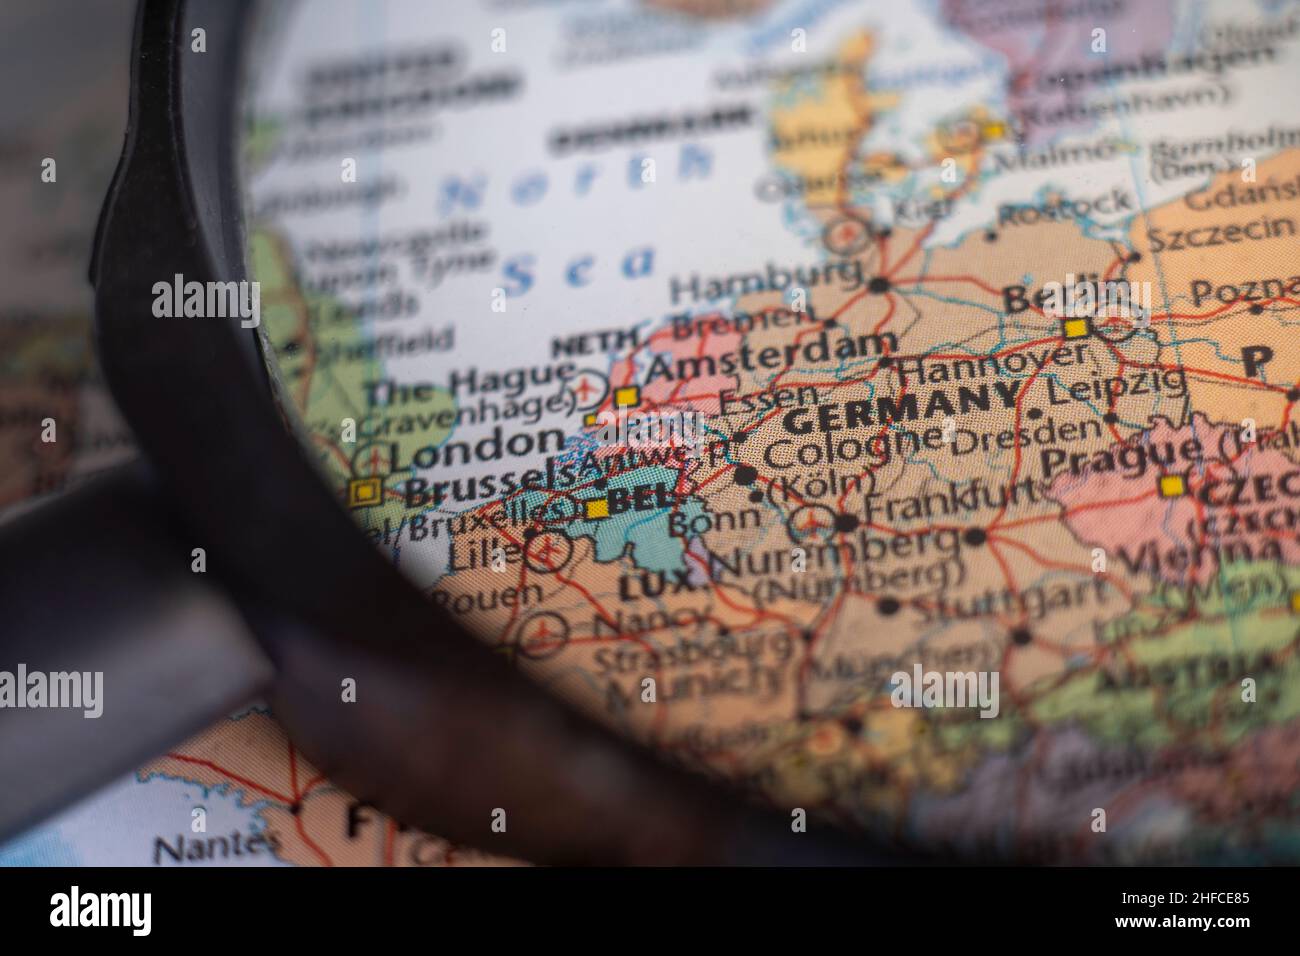 Germany on a world map through magnifying glass. Germany travel destination planning pinned Stock Photo